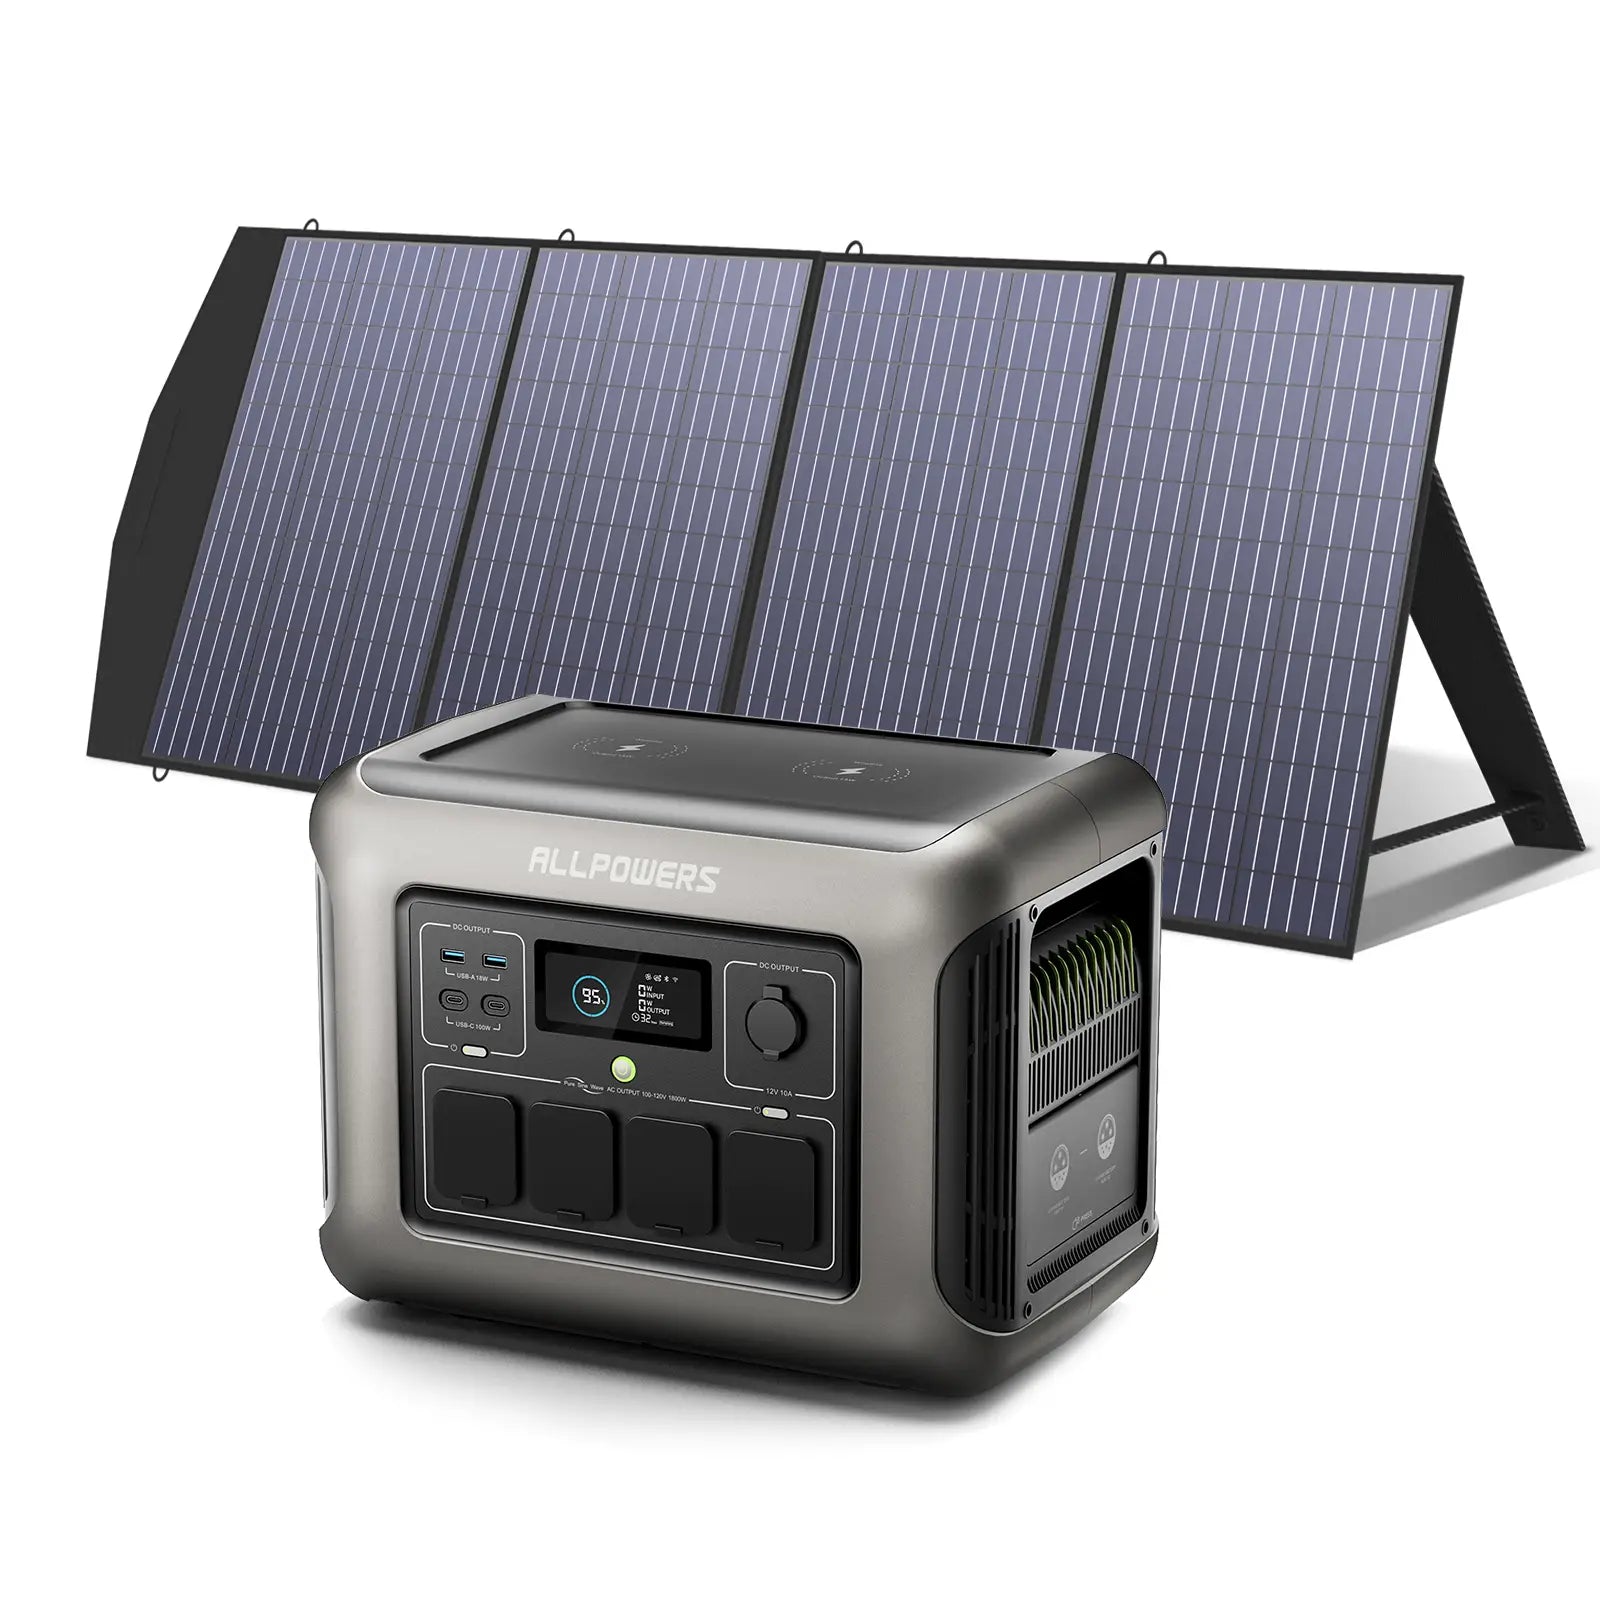 ALLPOWERS R1500 Portable Home Backup Power Station 1800W 1152Wh LiFeP04 Battery(R1500 + SP033 200W Solar Panel)